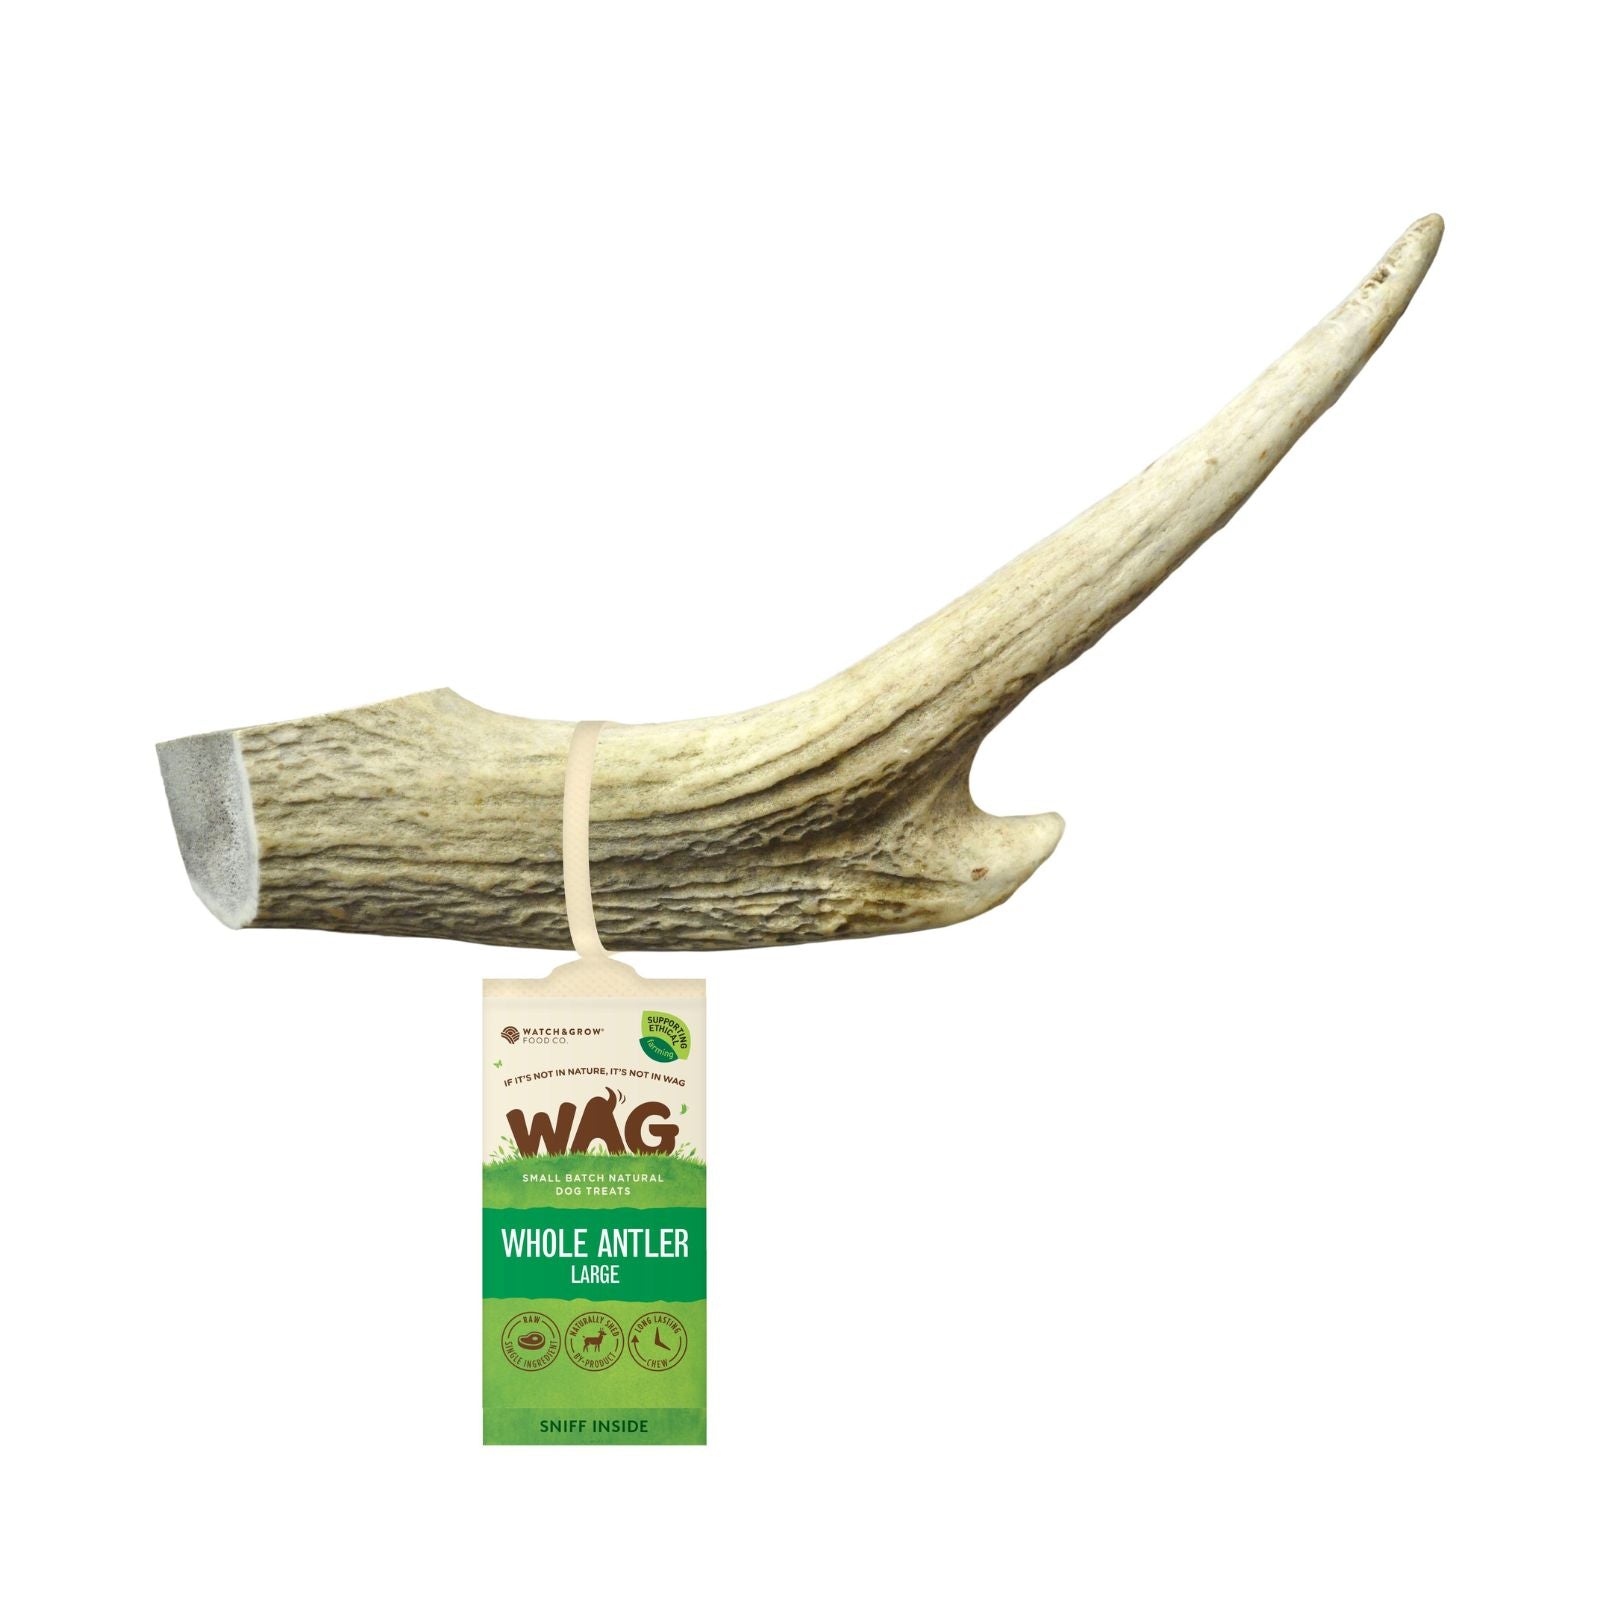 Premium Quality Large Deer Antler Dog Treat for Long-Lasting Chewing